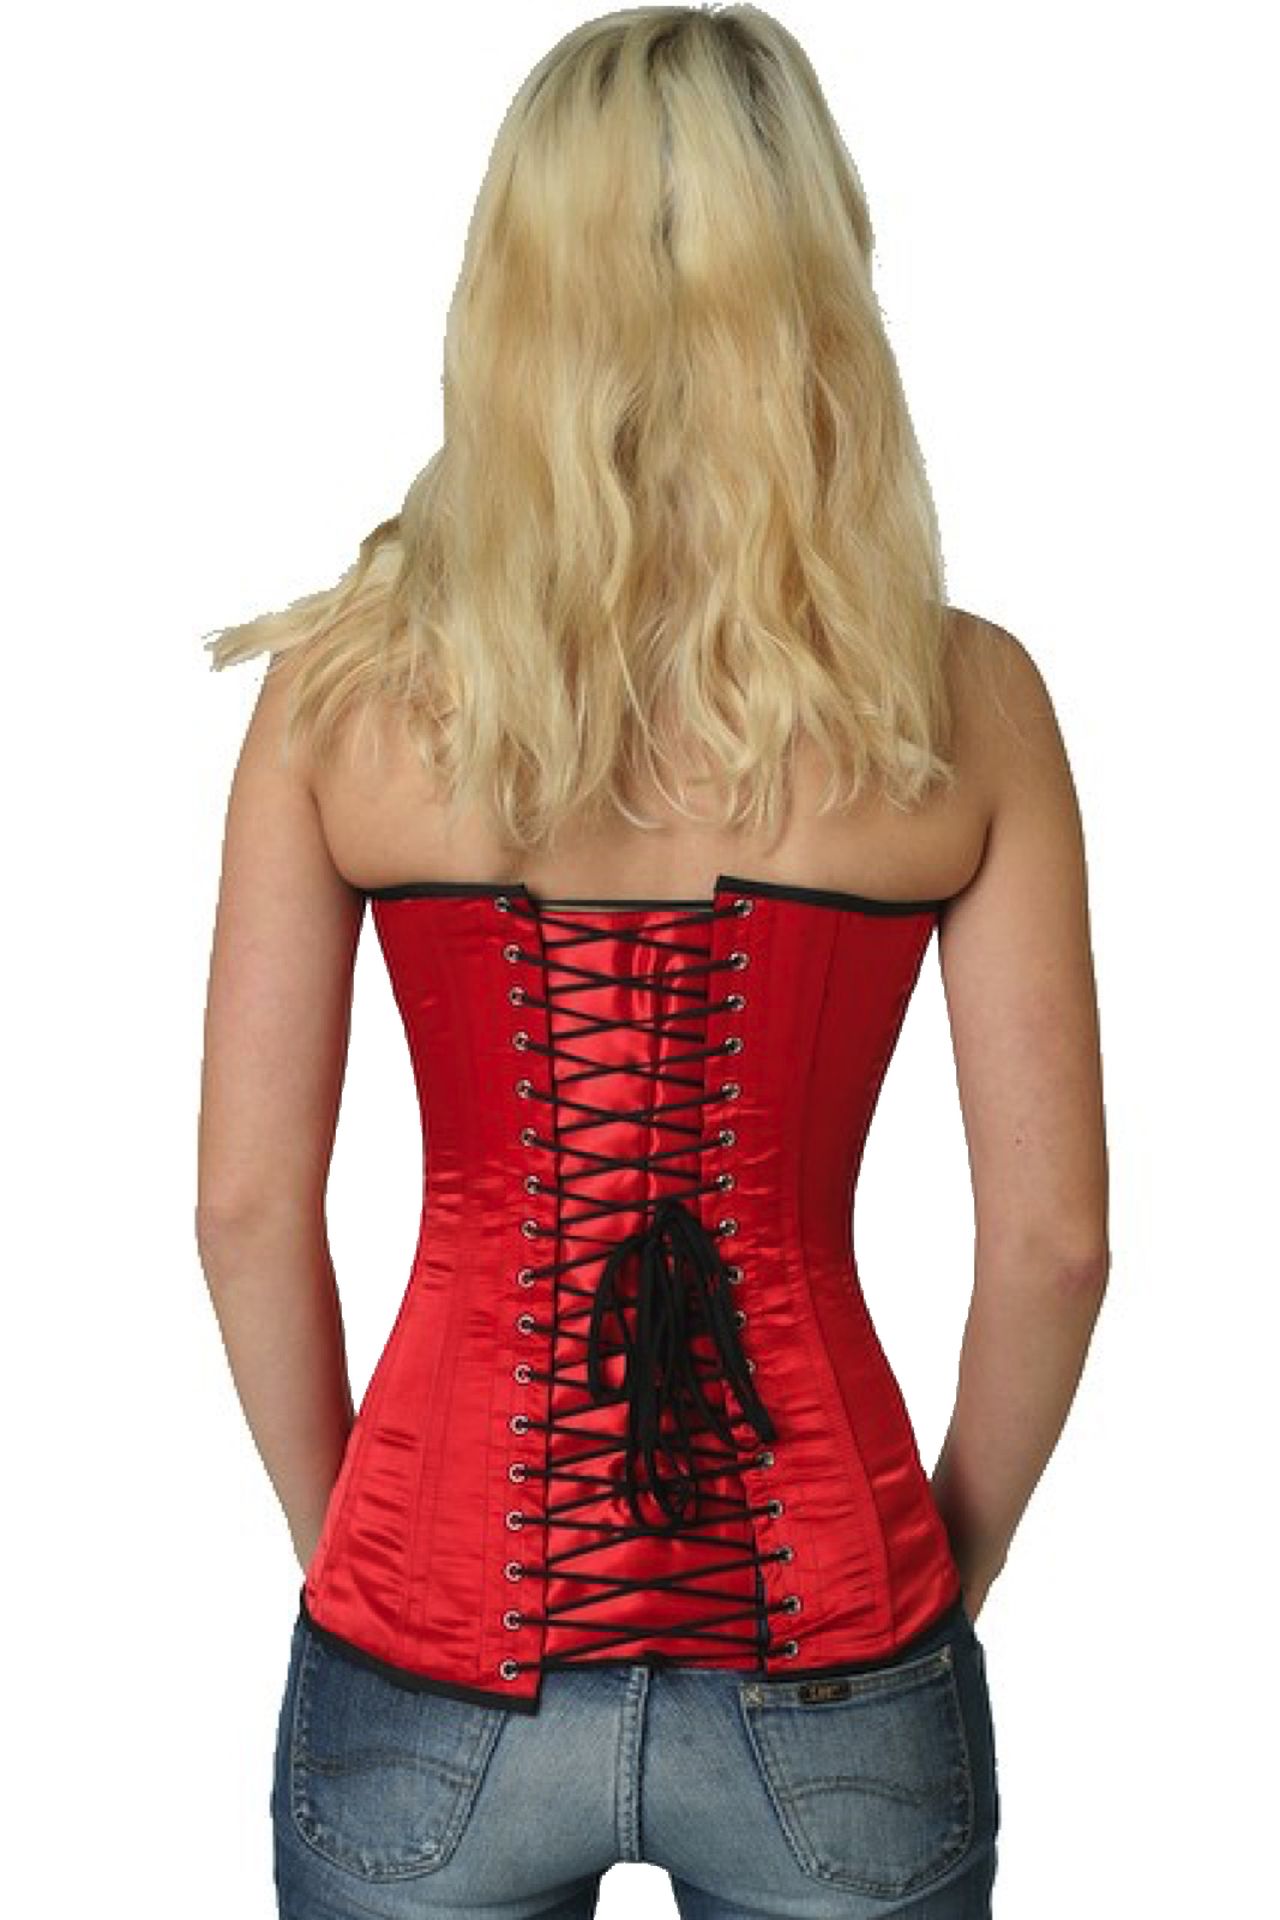 Corset red satin overbust sy06